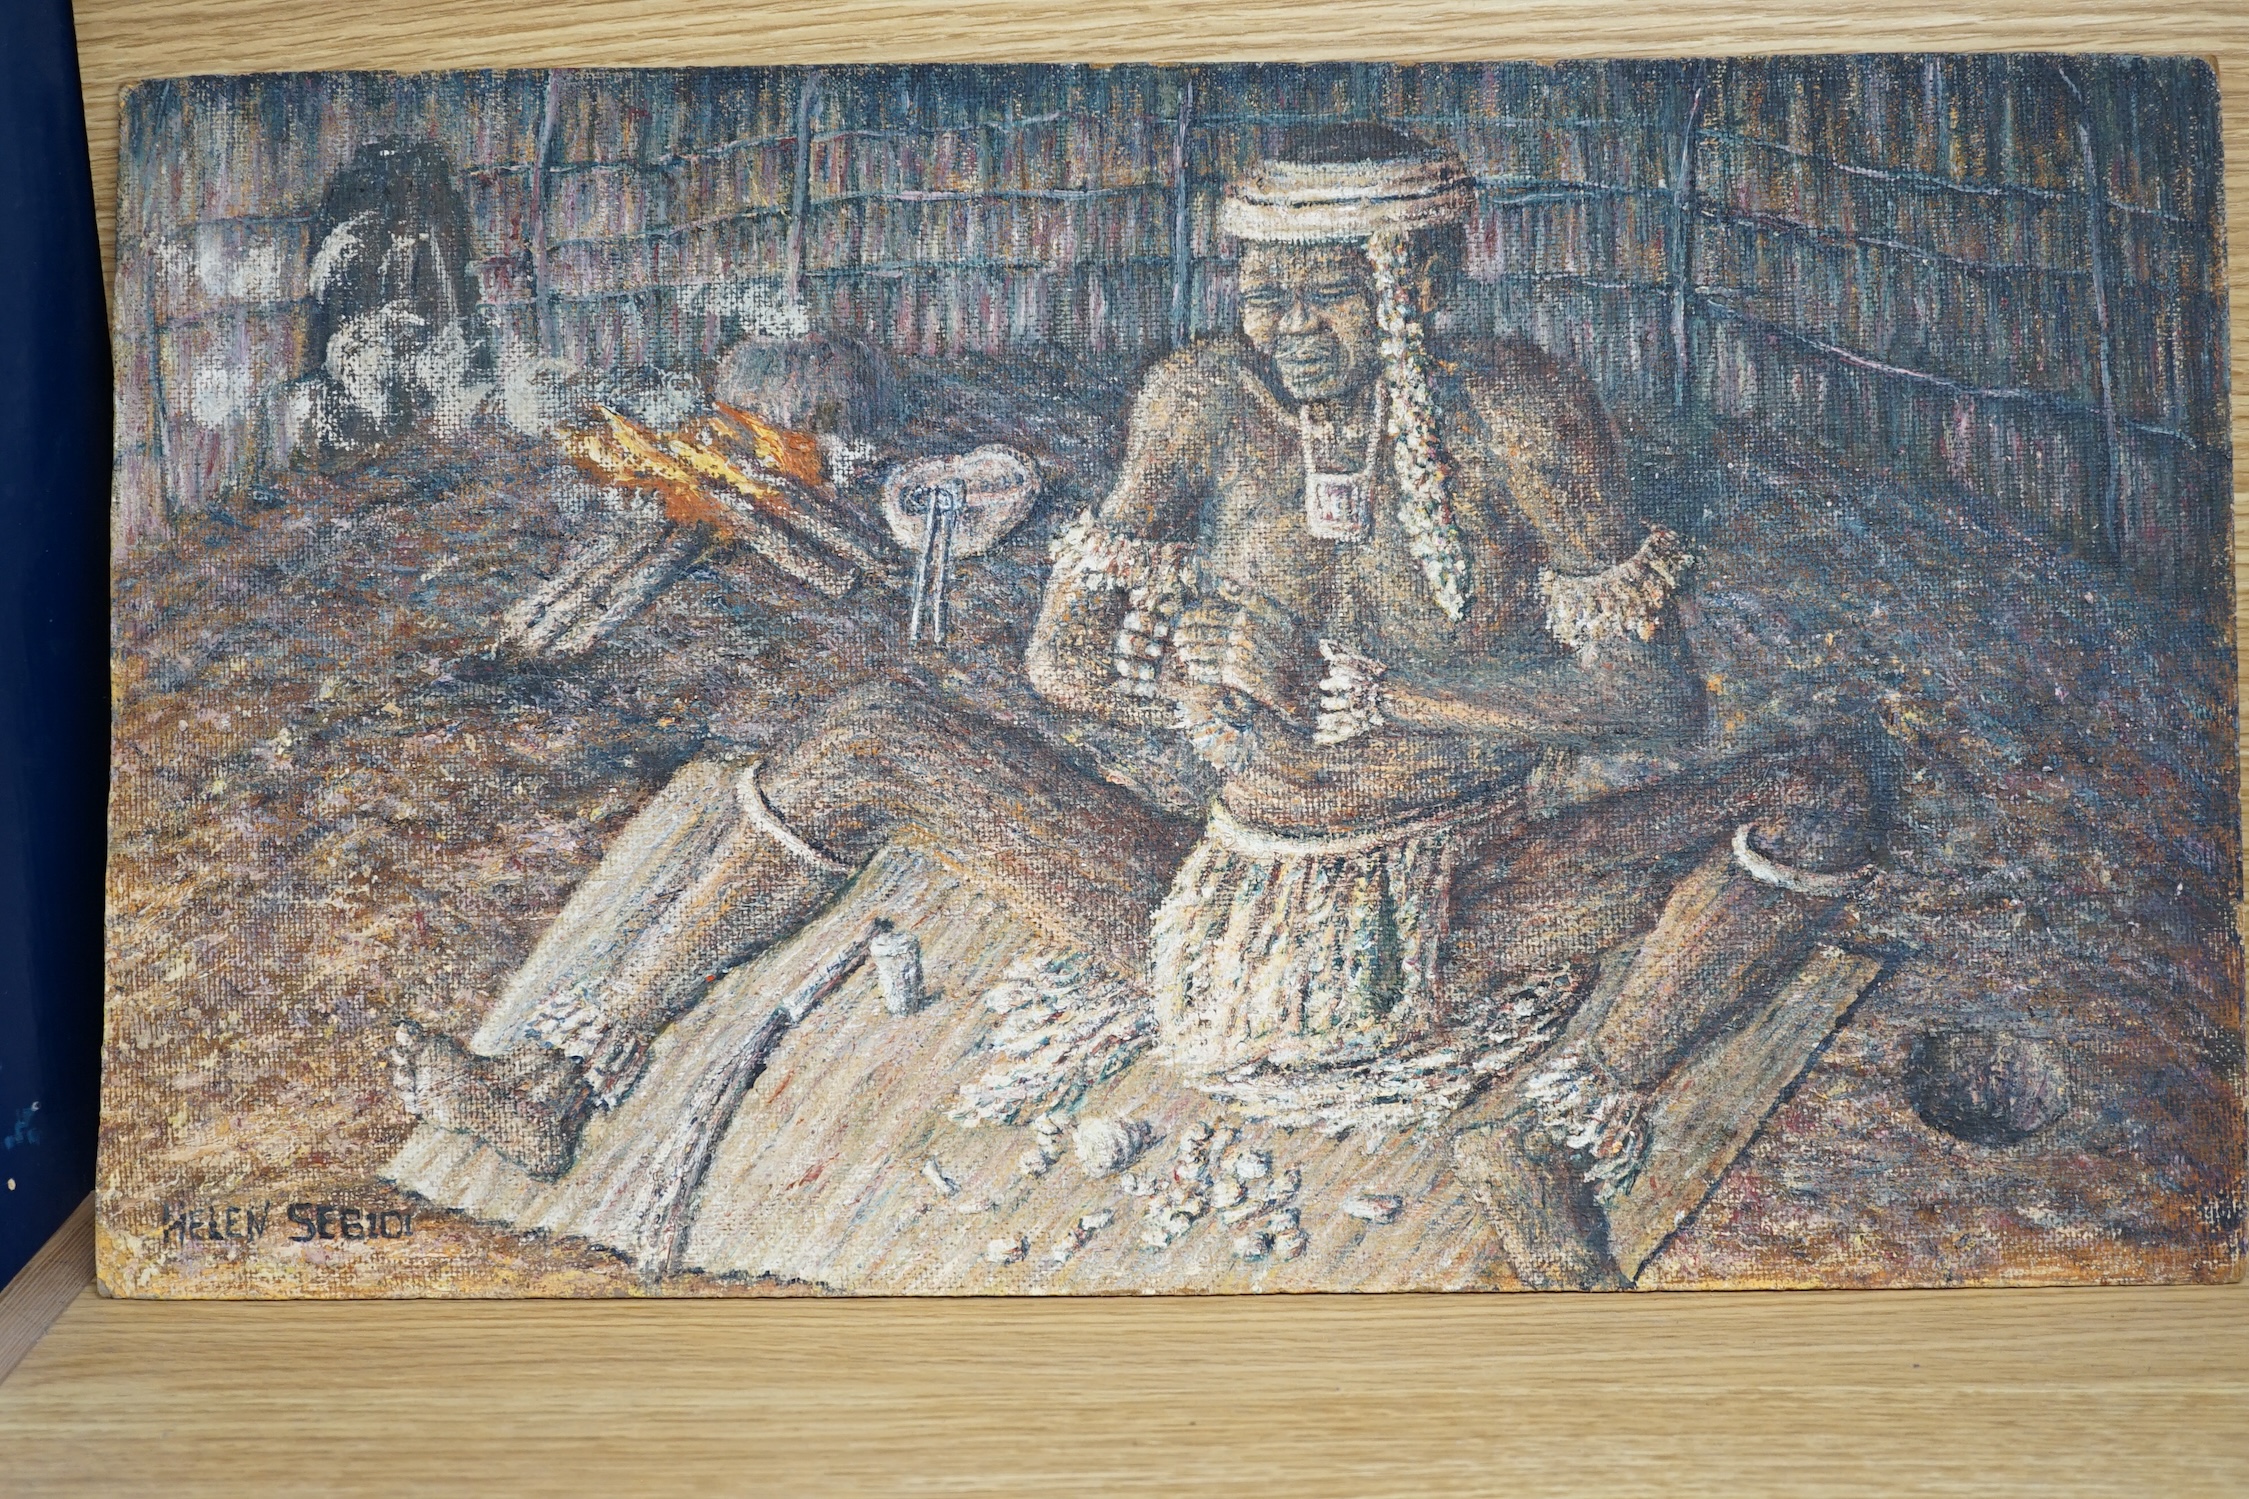 Aboriginal oil on board, Seated figure, indistinctly signed, Helen See?, 30 x 51cm. unframed. Condition - fair